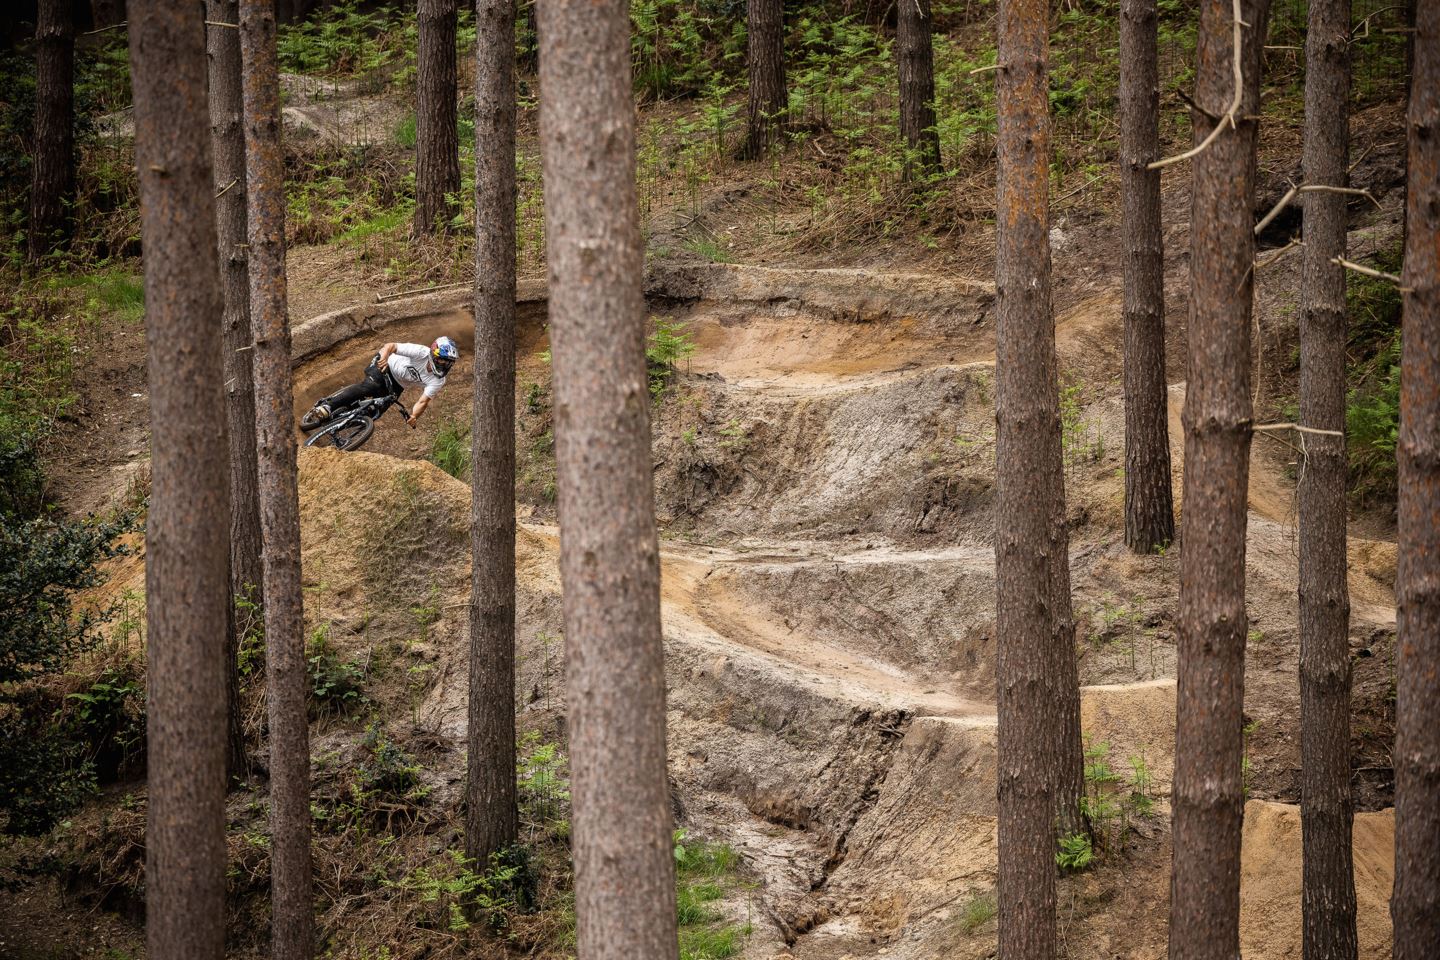 A front-on shot of Kade Edwards riding down a trail.